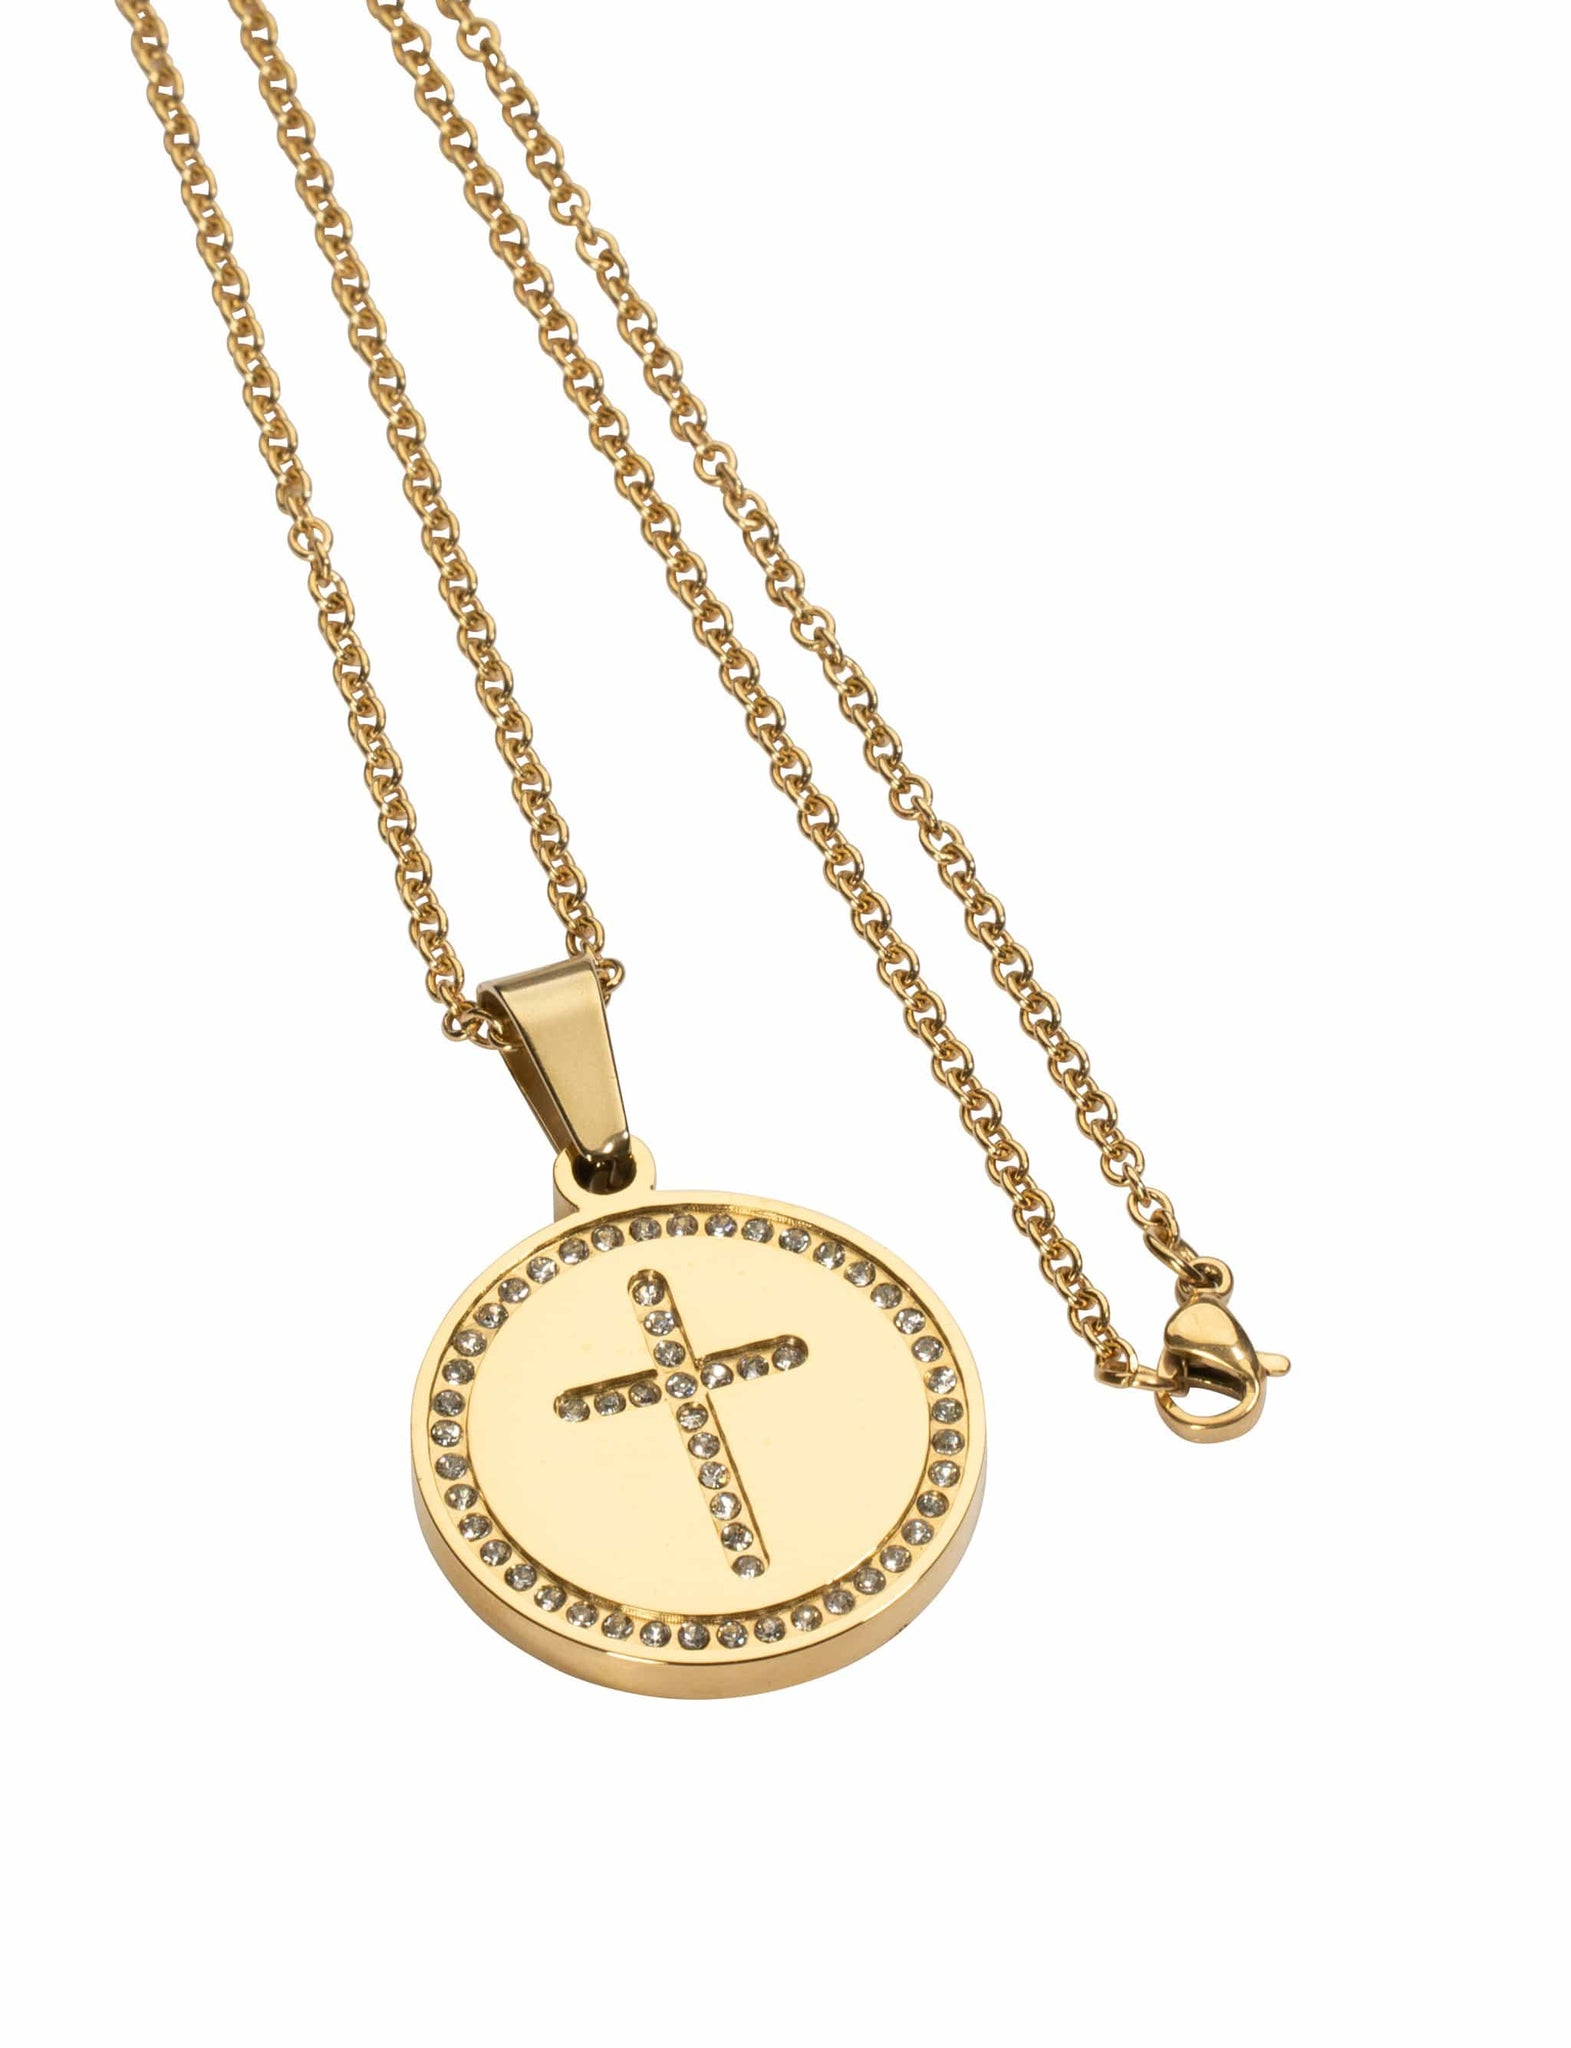 What is the best cross necklace for women? - Quora